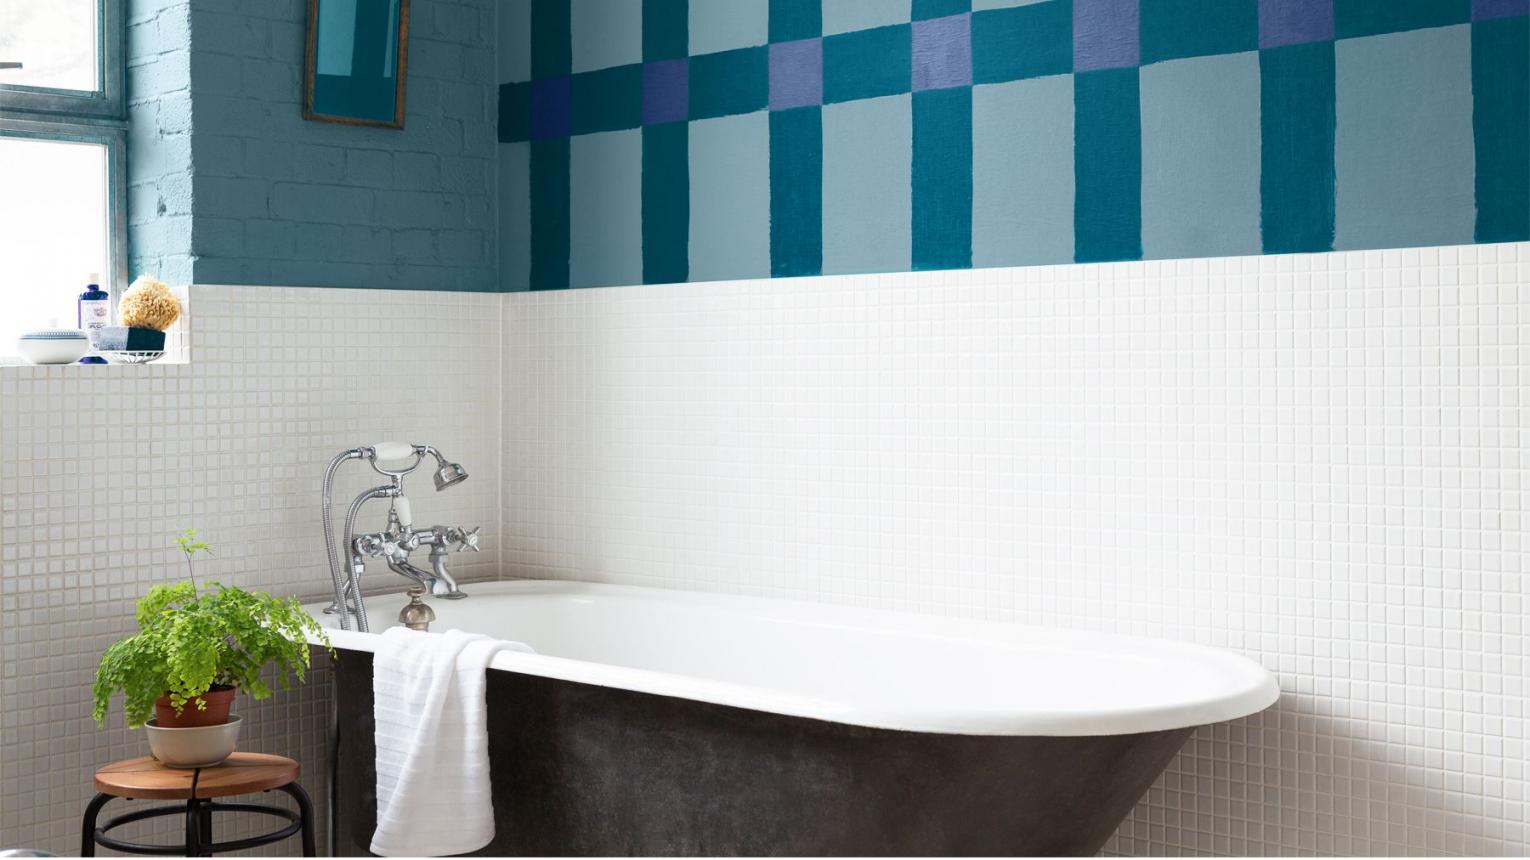 Dr Dulux How To Paint Over Tiles, Can You Use Dulux Bathroom Paint On Tiles